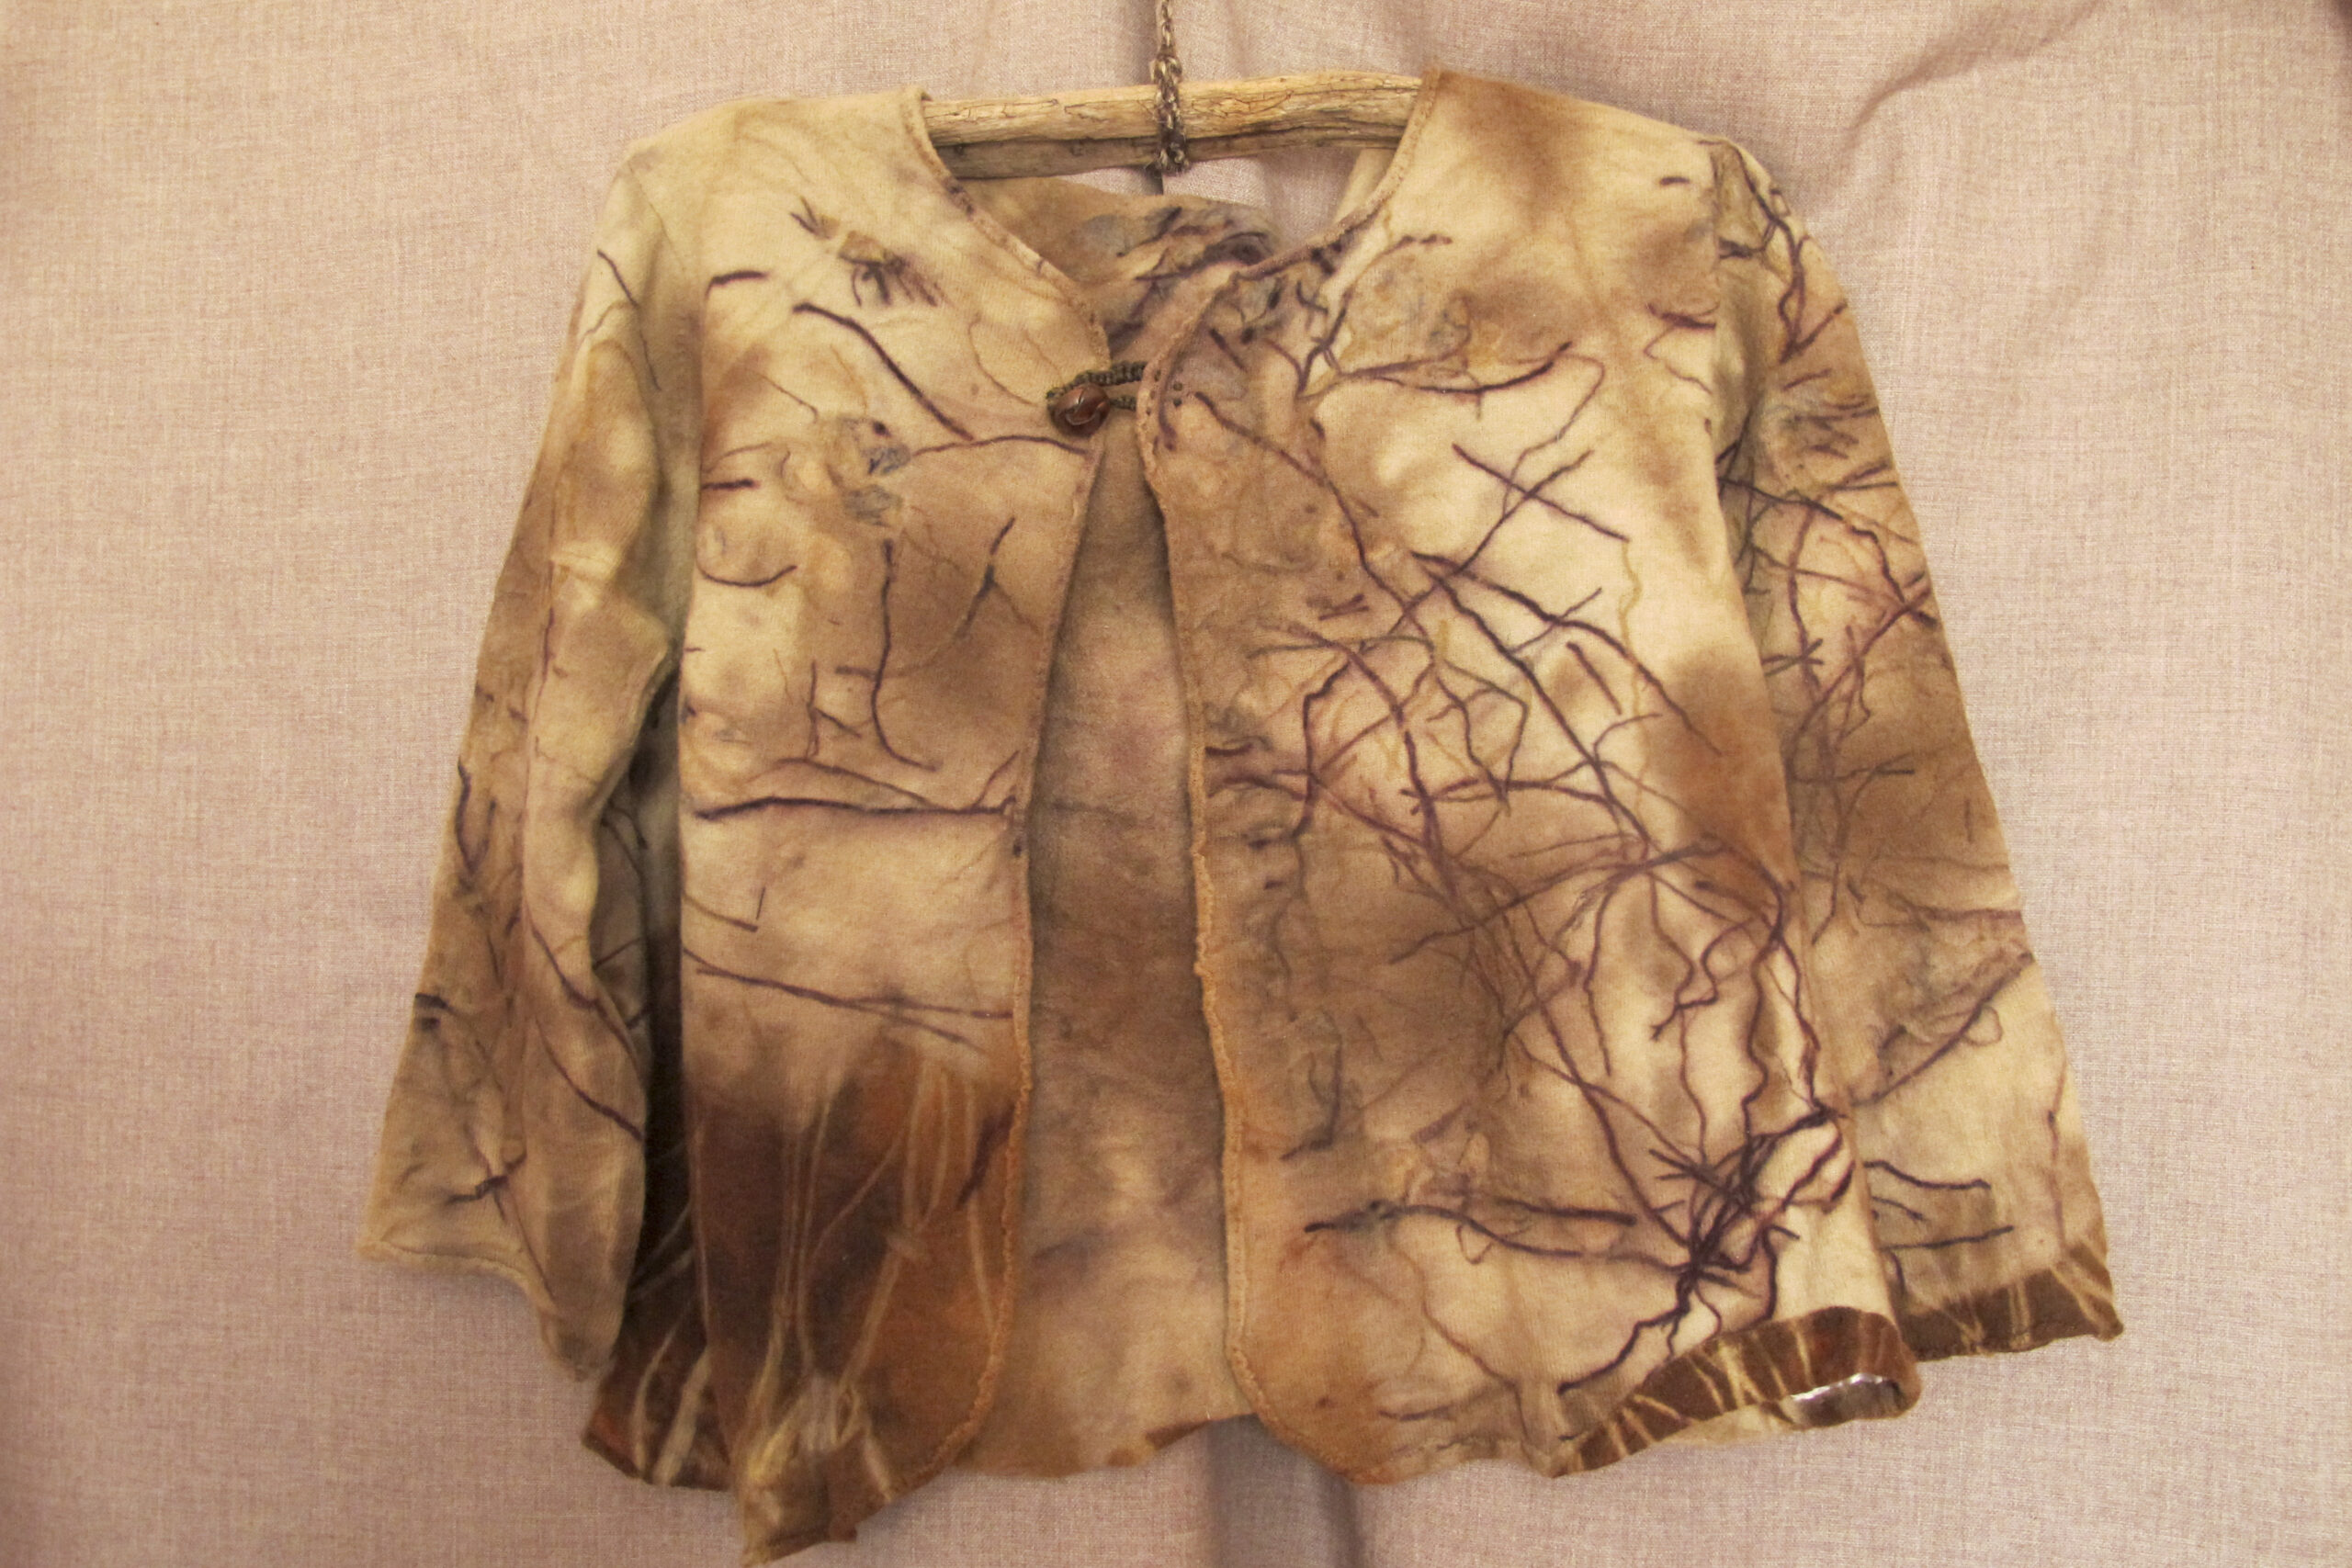 The image shows a jacket made of eco-dyed fabrics for the Textile Art Retreat Found, Collected, Dyed, Stitched with Textile Artist Aujke Boonstra Art Trails Tasmania for her workshop at the Tin Dragon Trails Cottages